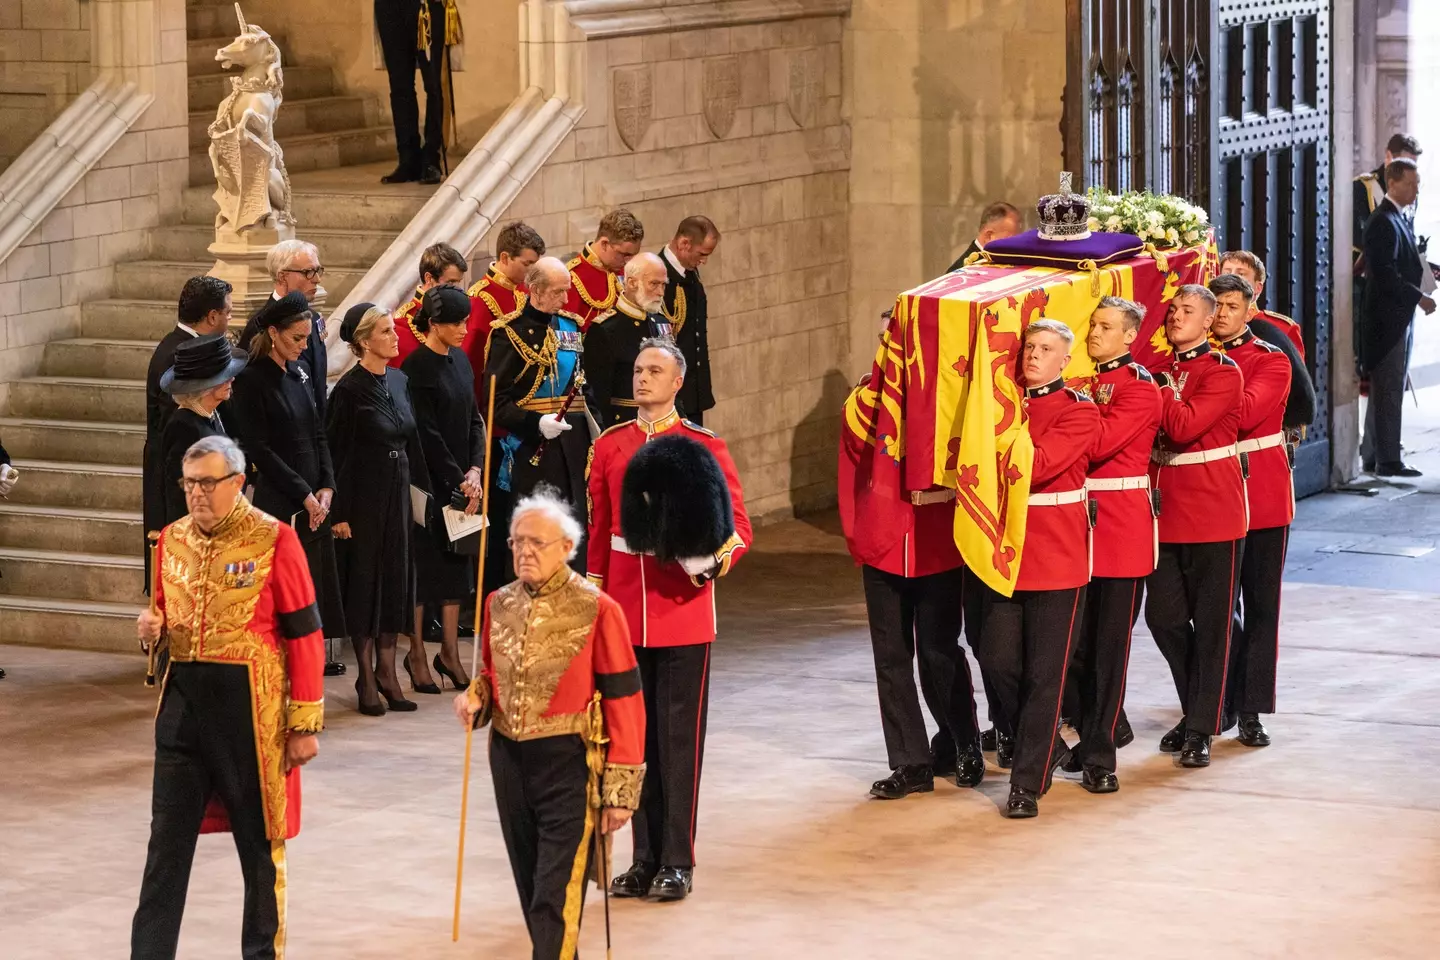 The Queen's coffin was displayed in Westminster Hall before the funeral took place.